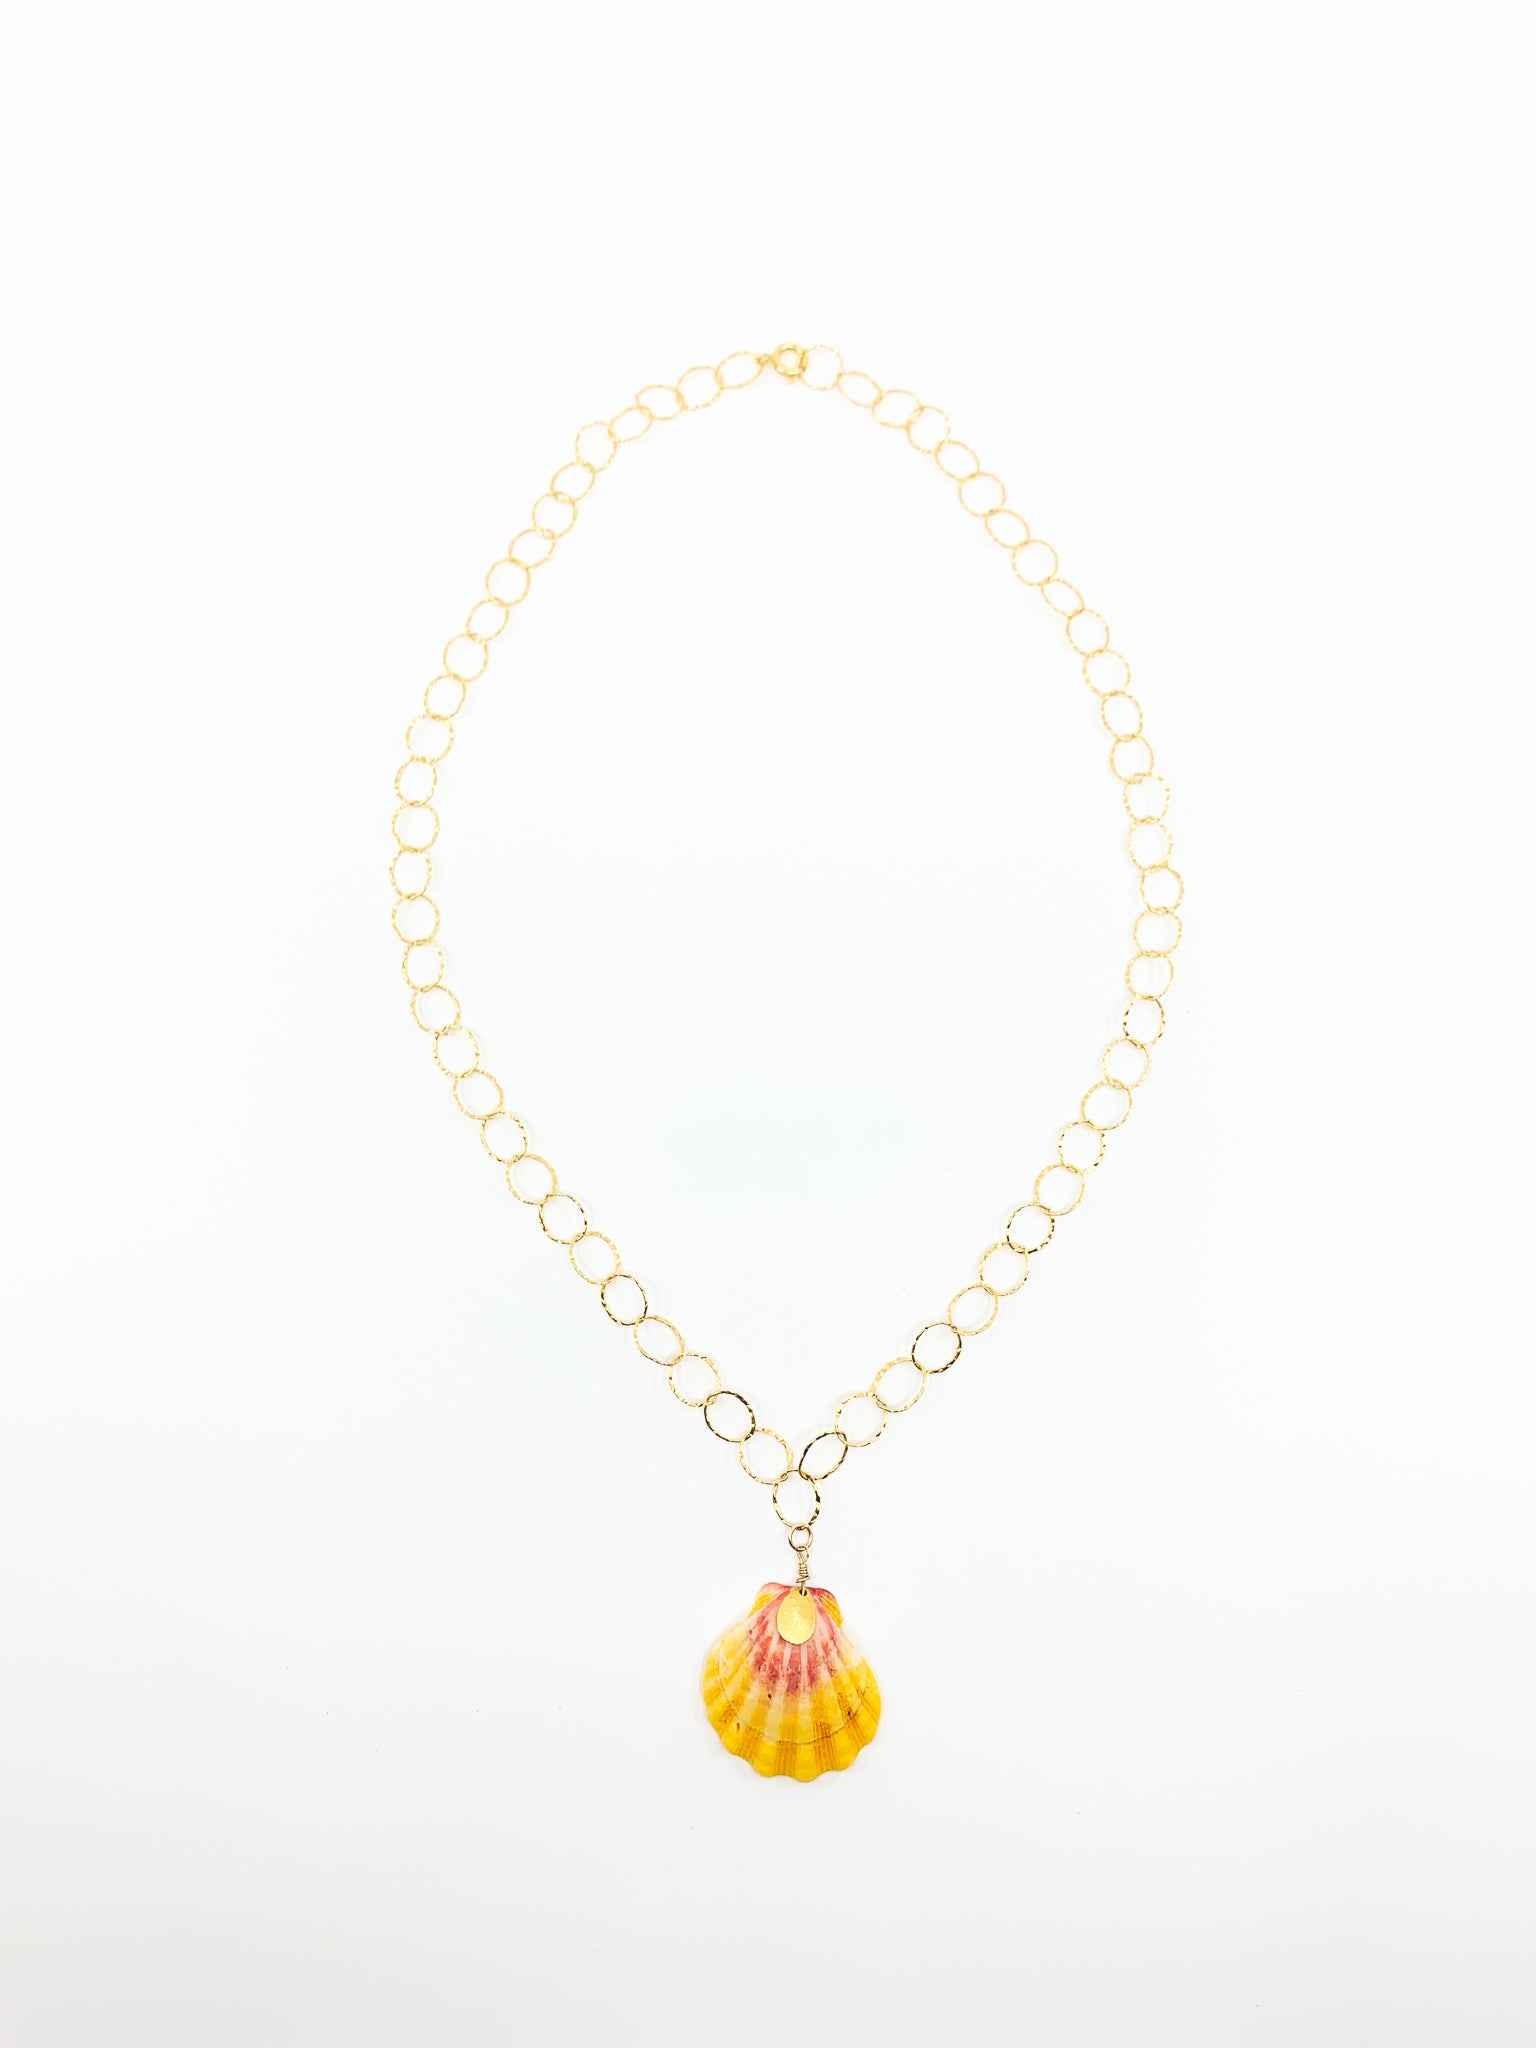 Hawaiian sunrise shell gold chain necklace by eve black jewelry made in Hawaii